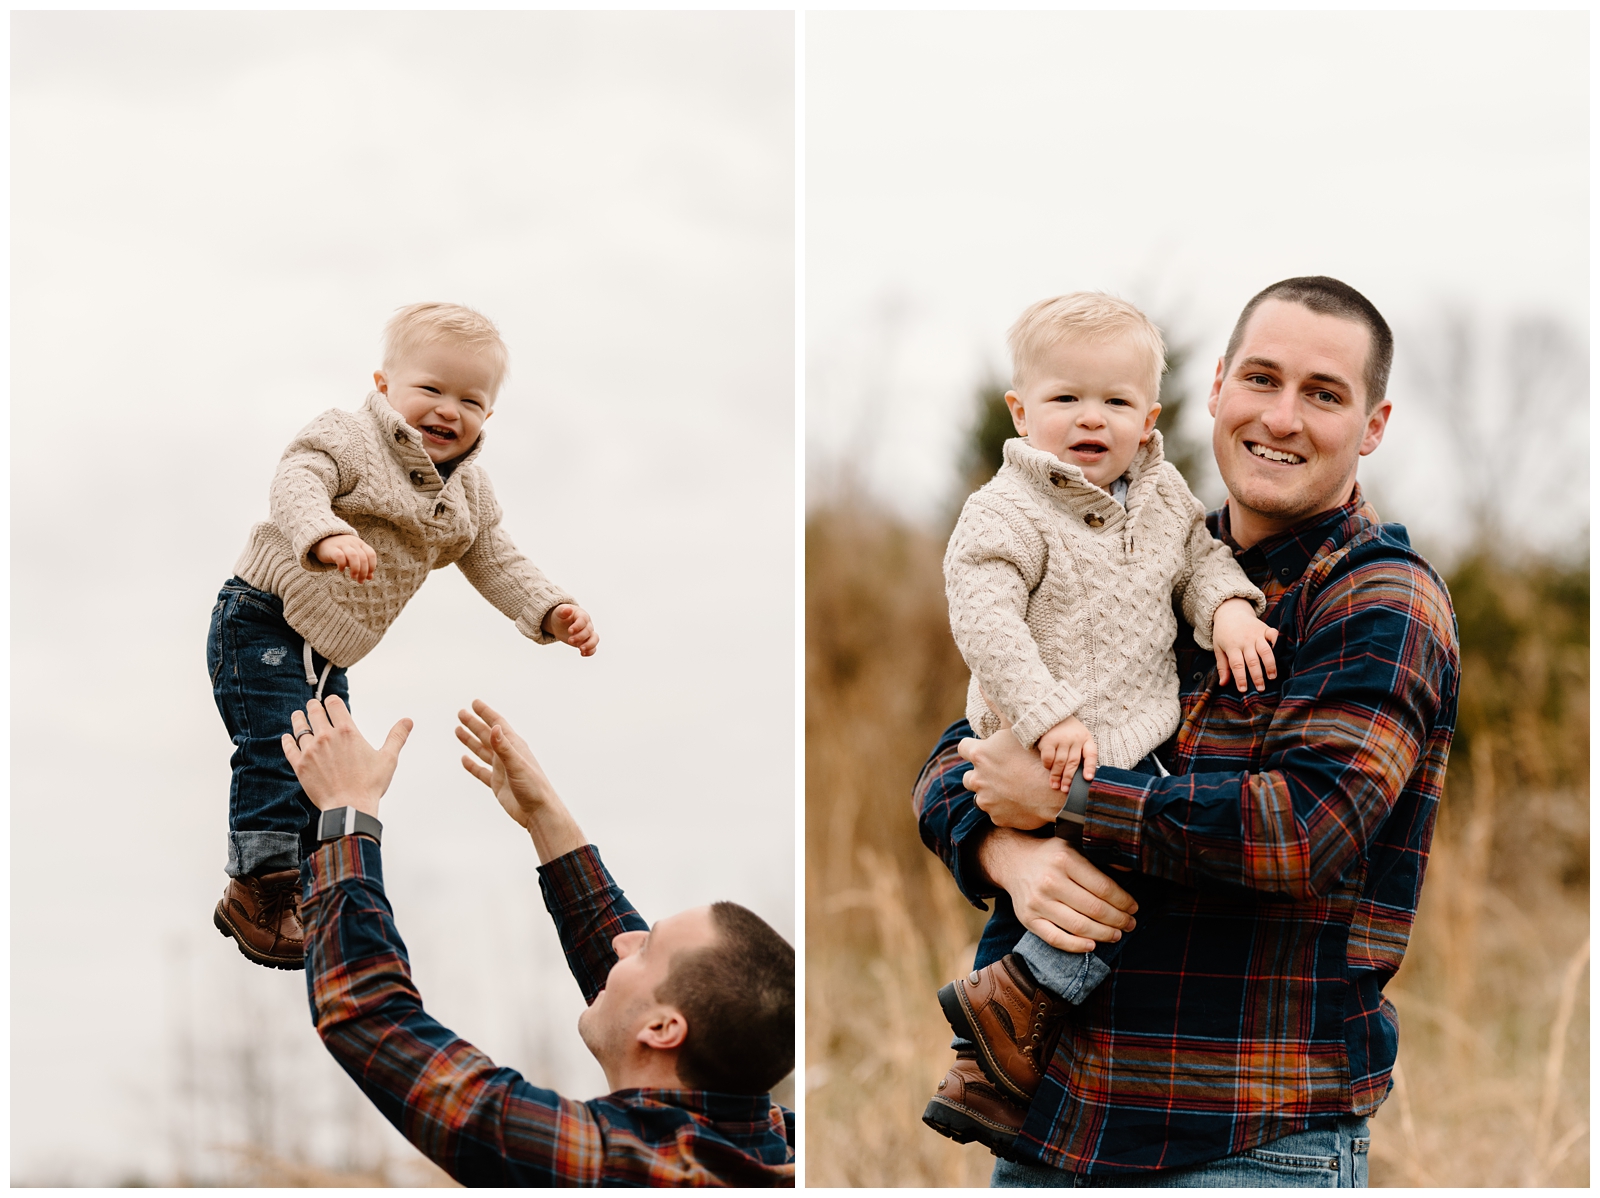 Fun daddy and me photos at fall family session in Kernersville by North Carolina photographer